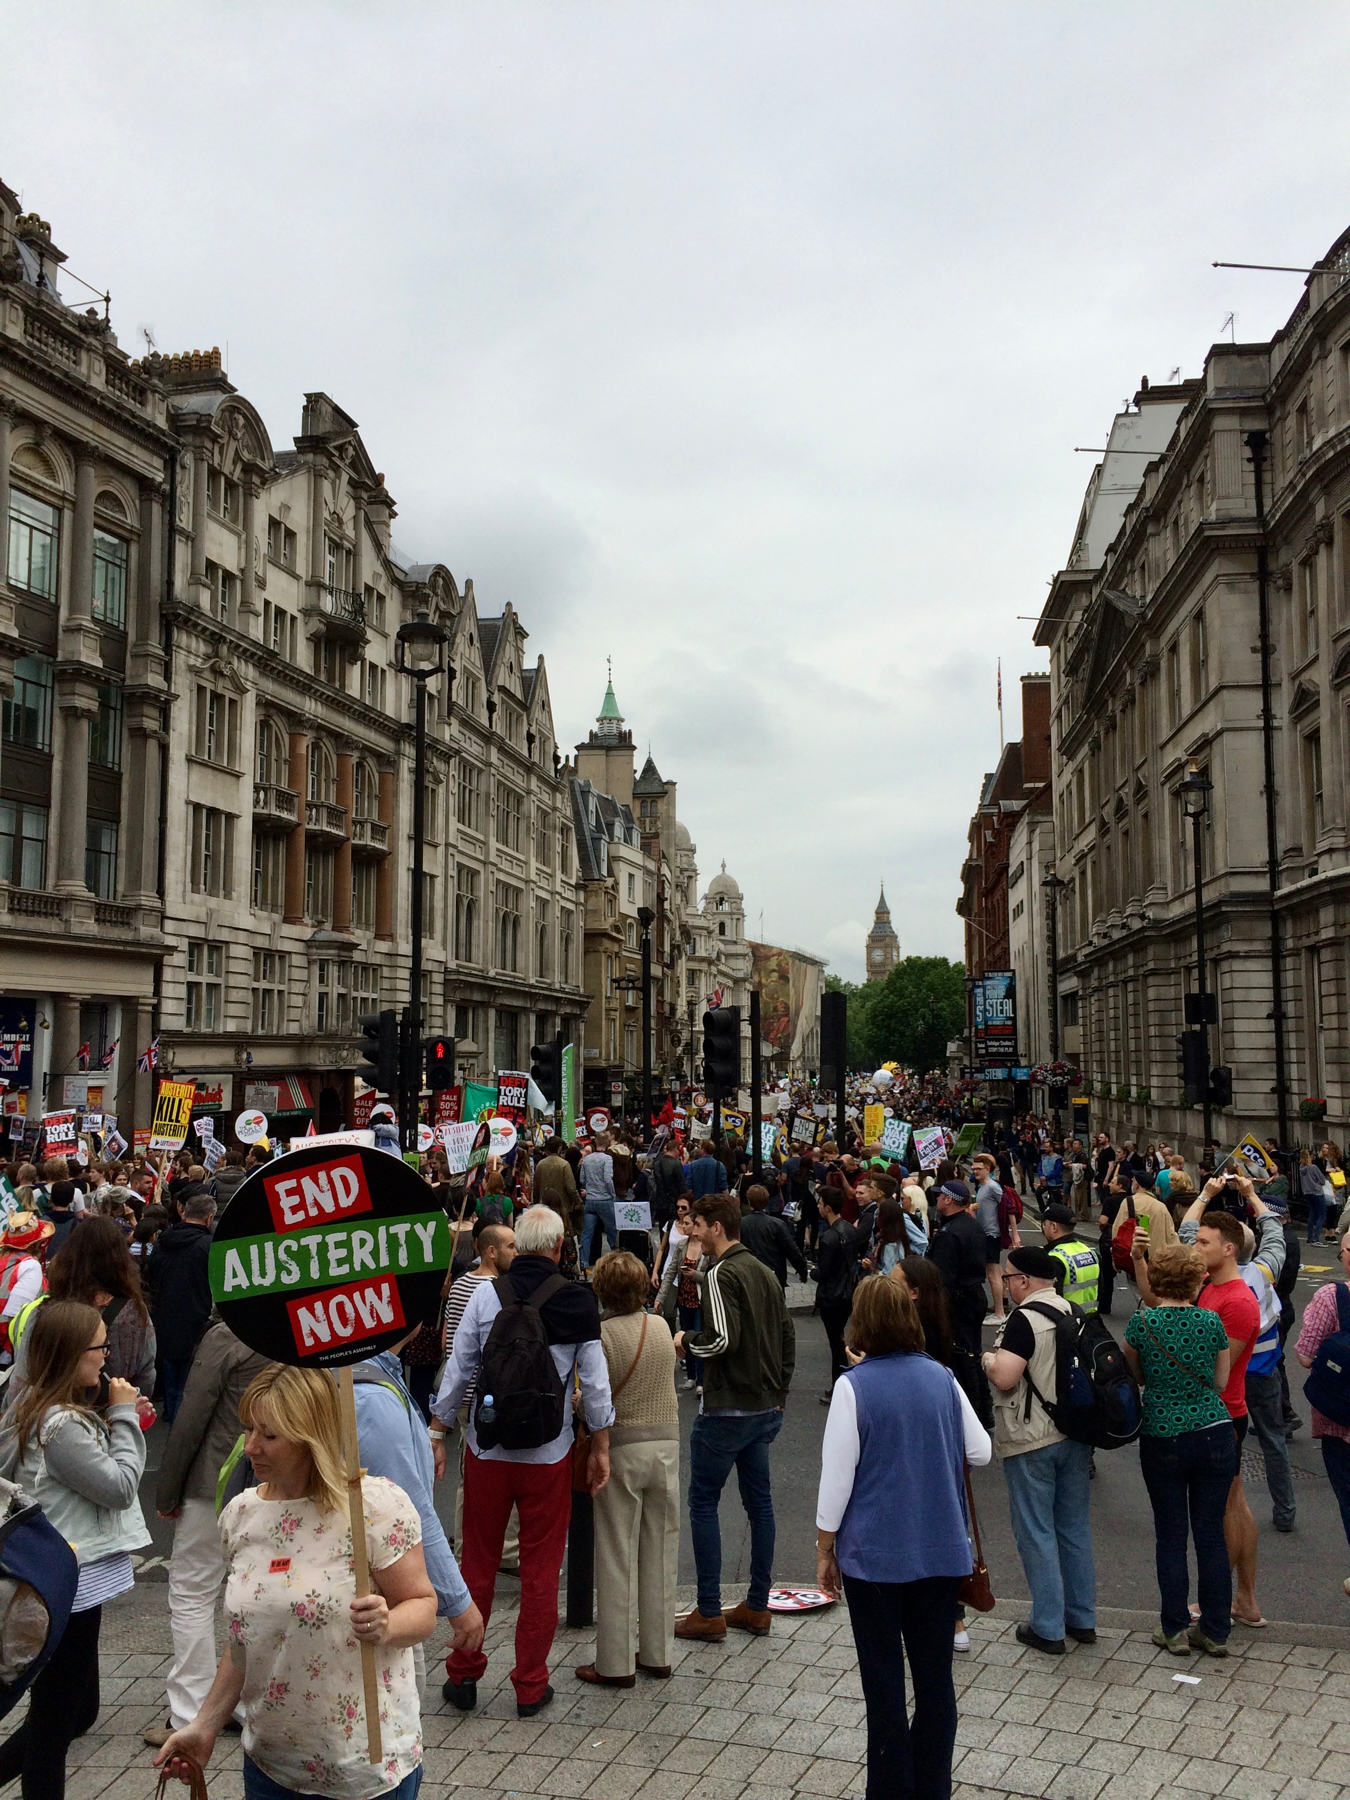 Crowd of people, many holding banners, marching down a city street. Clock tower of Big Ben in the distance.